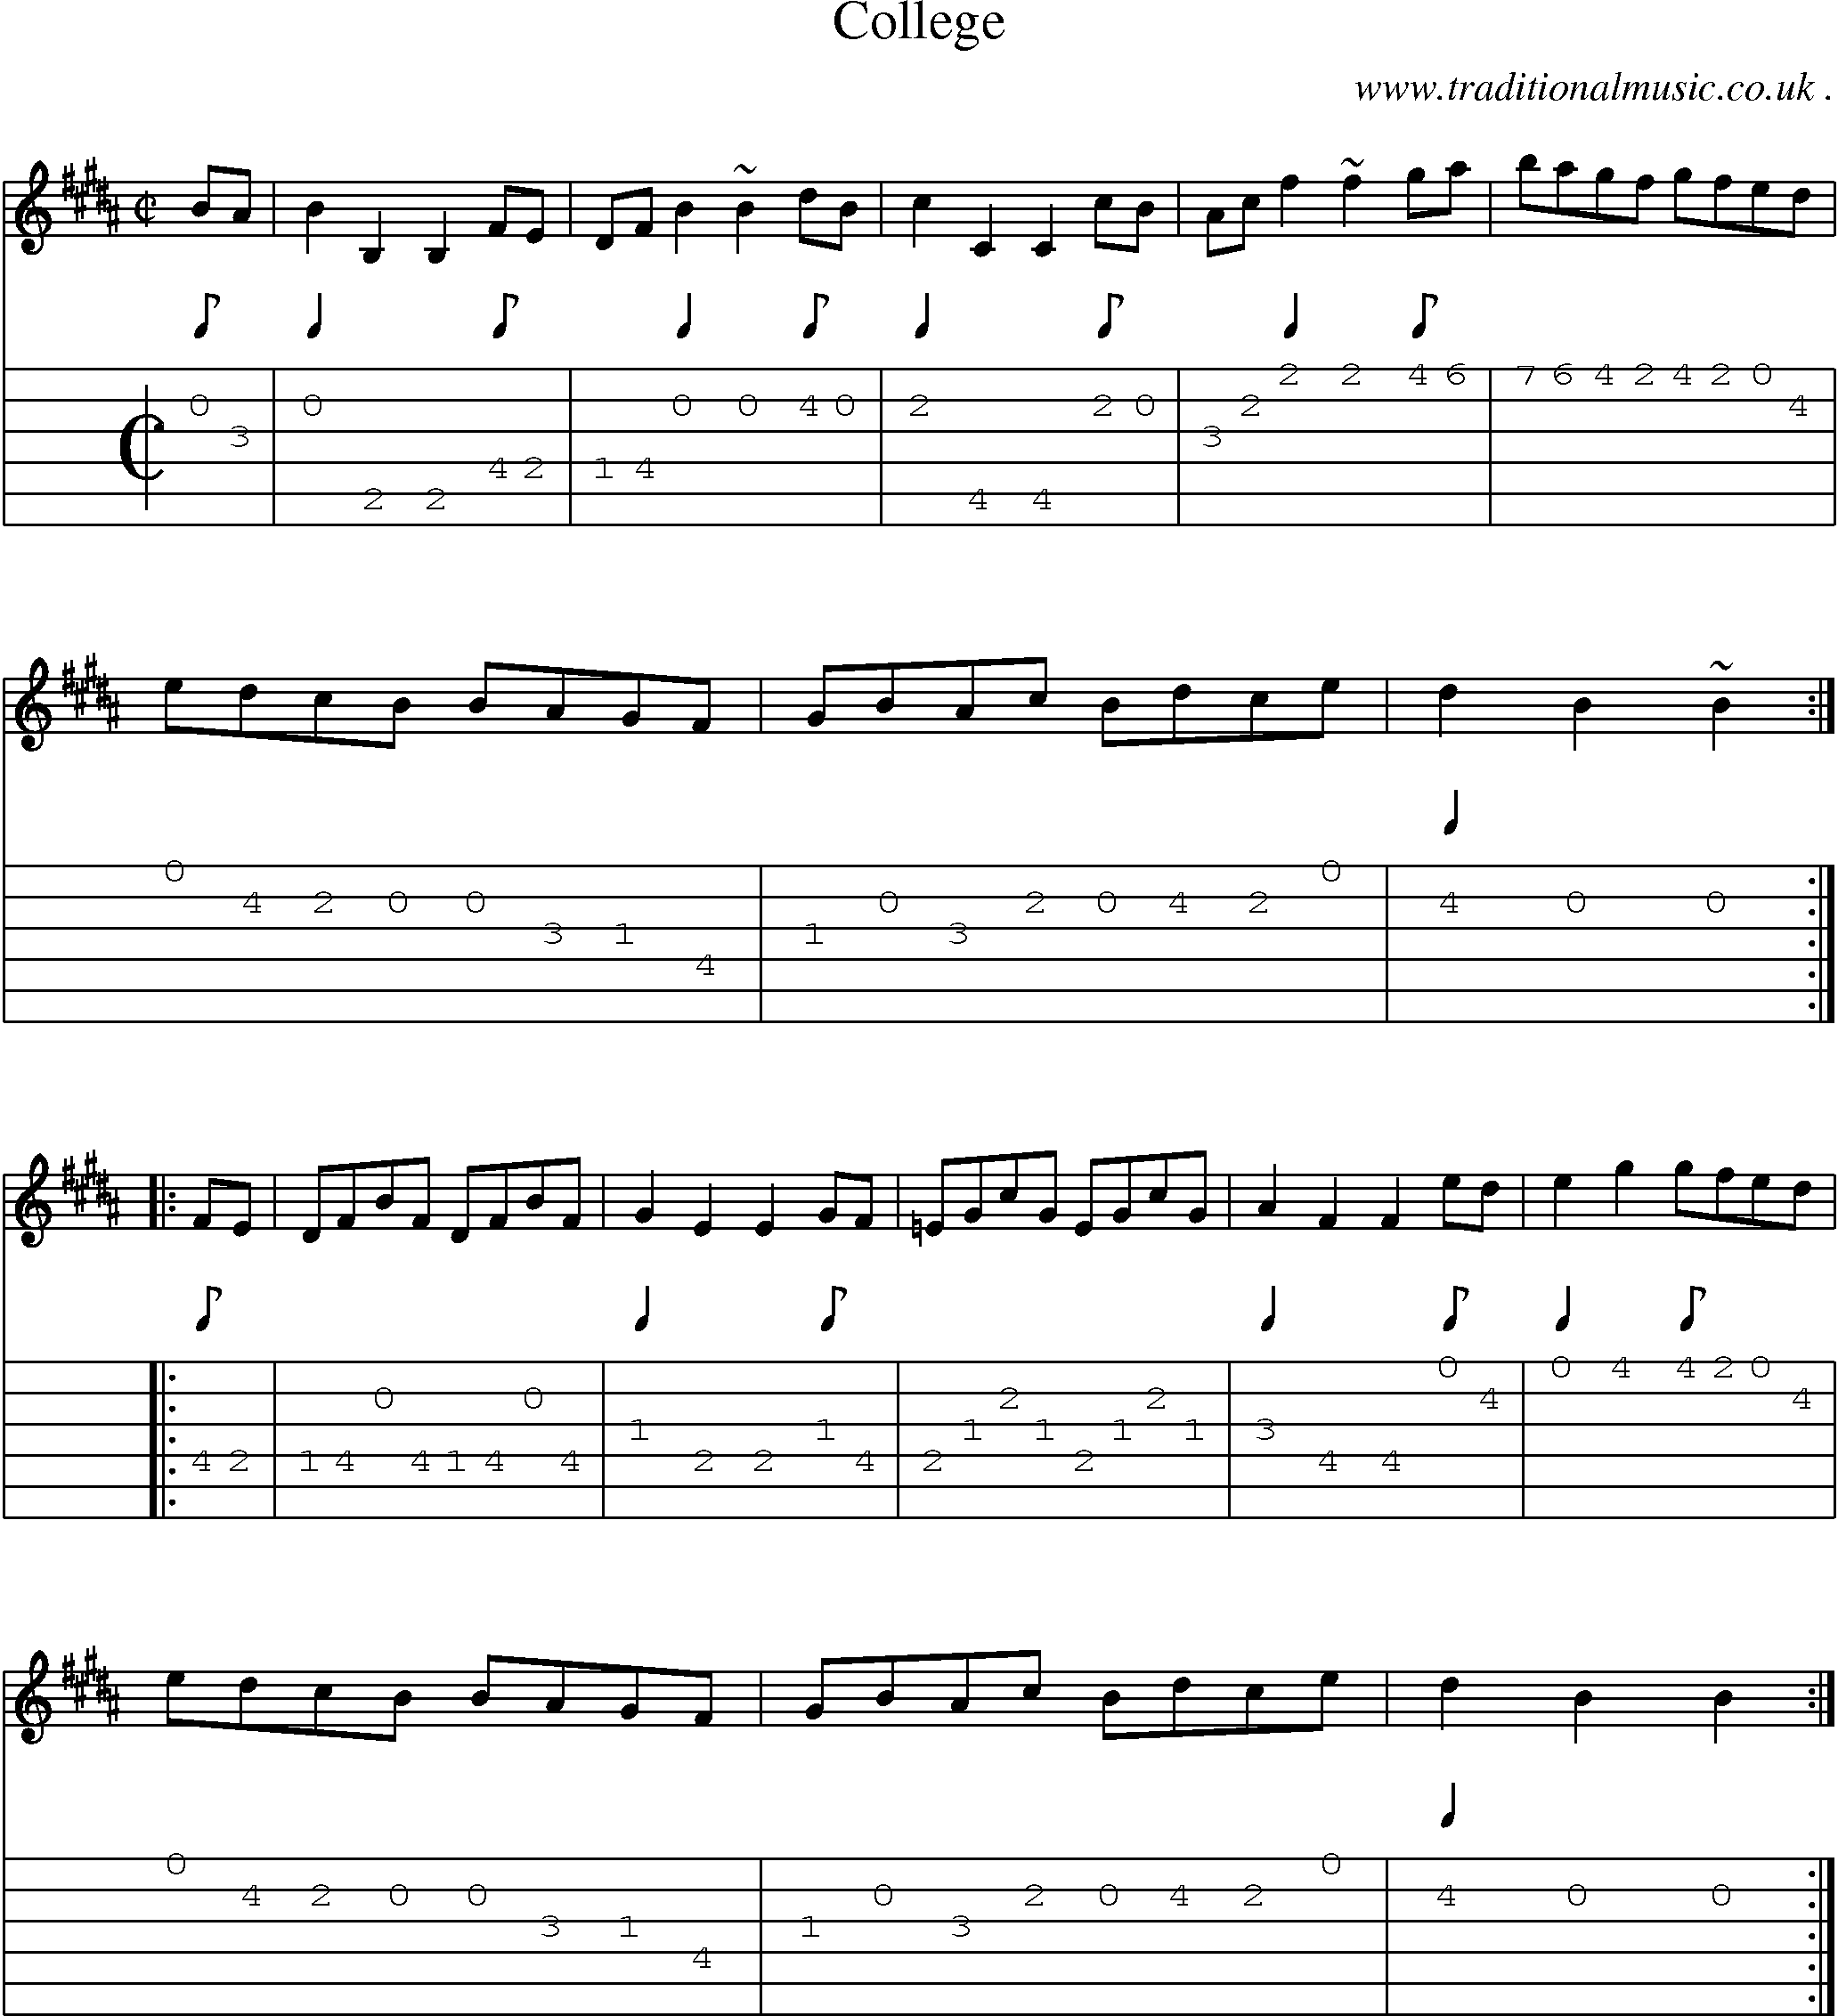 Sheet-music  score, Chords and Guitar Tabs for College